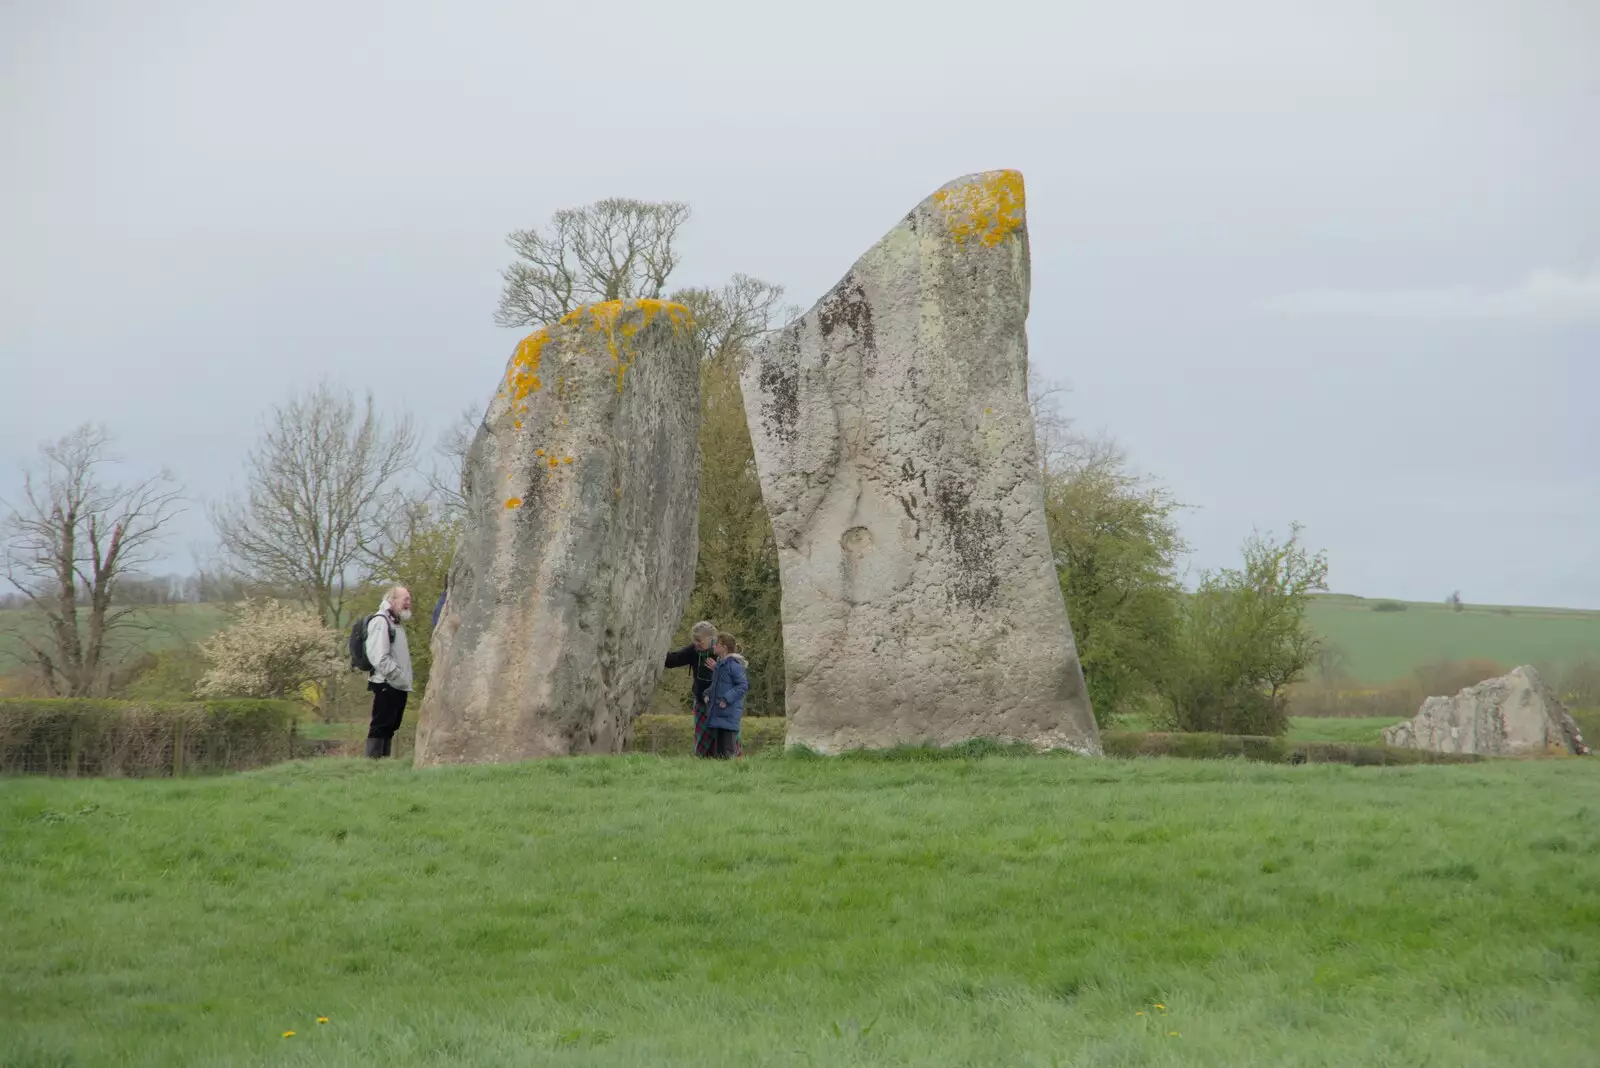 More standing stones are inspected, from A Postcard from Marlborough and a Walk on the Herepath, Avebury, Wiltshire - 8th April 2024